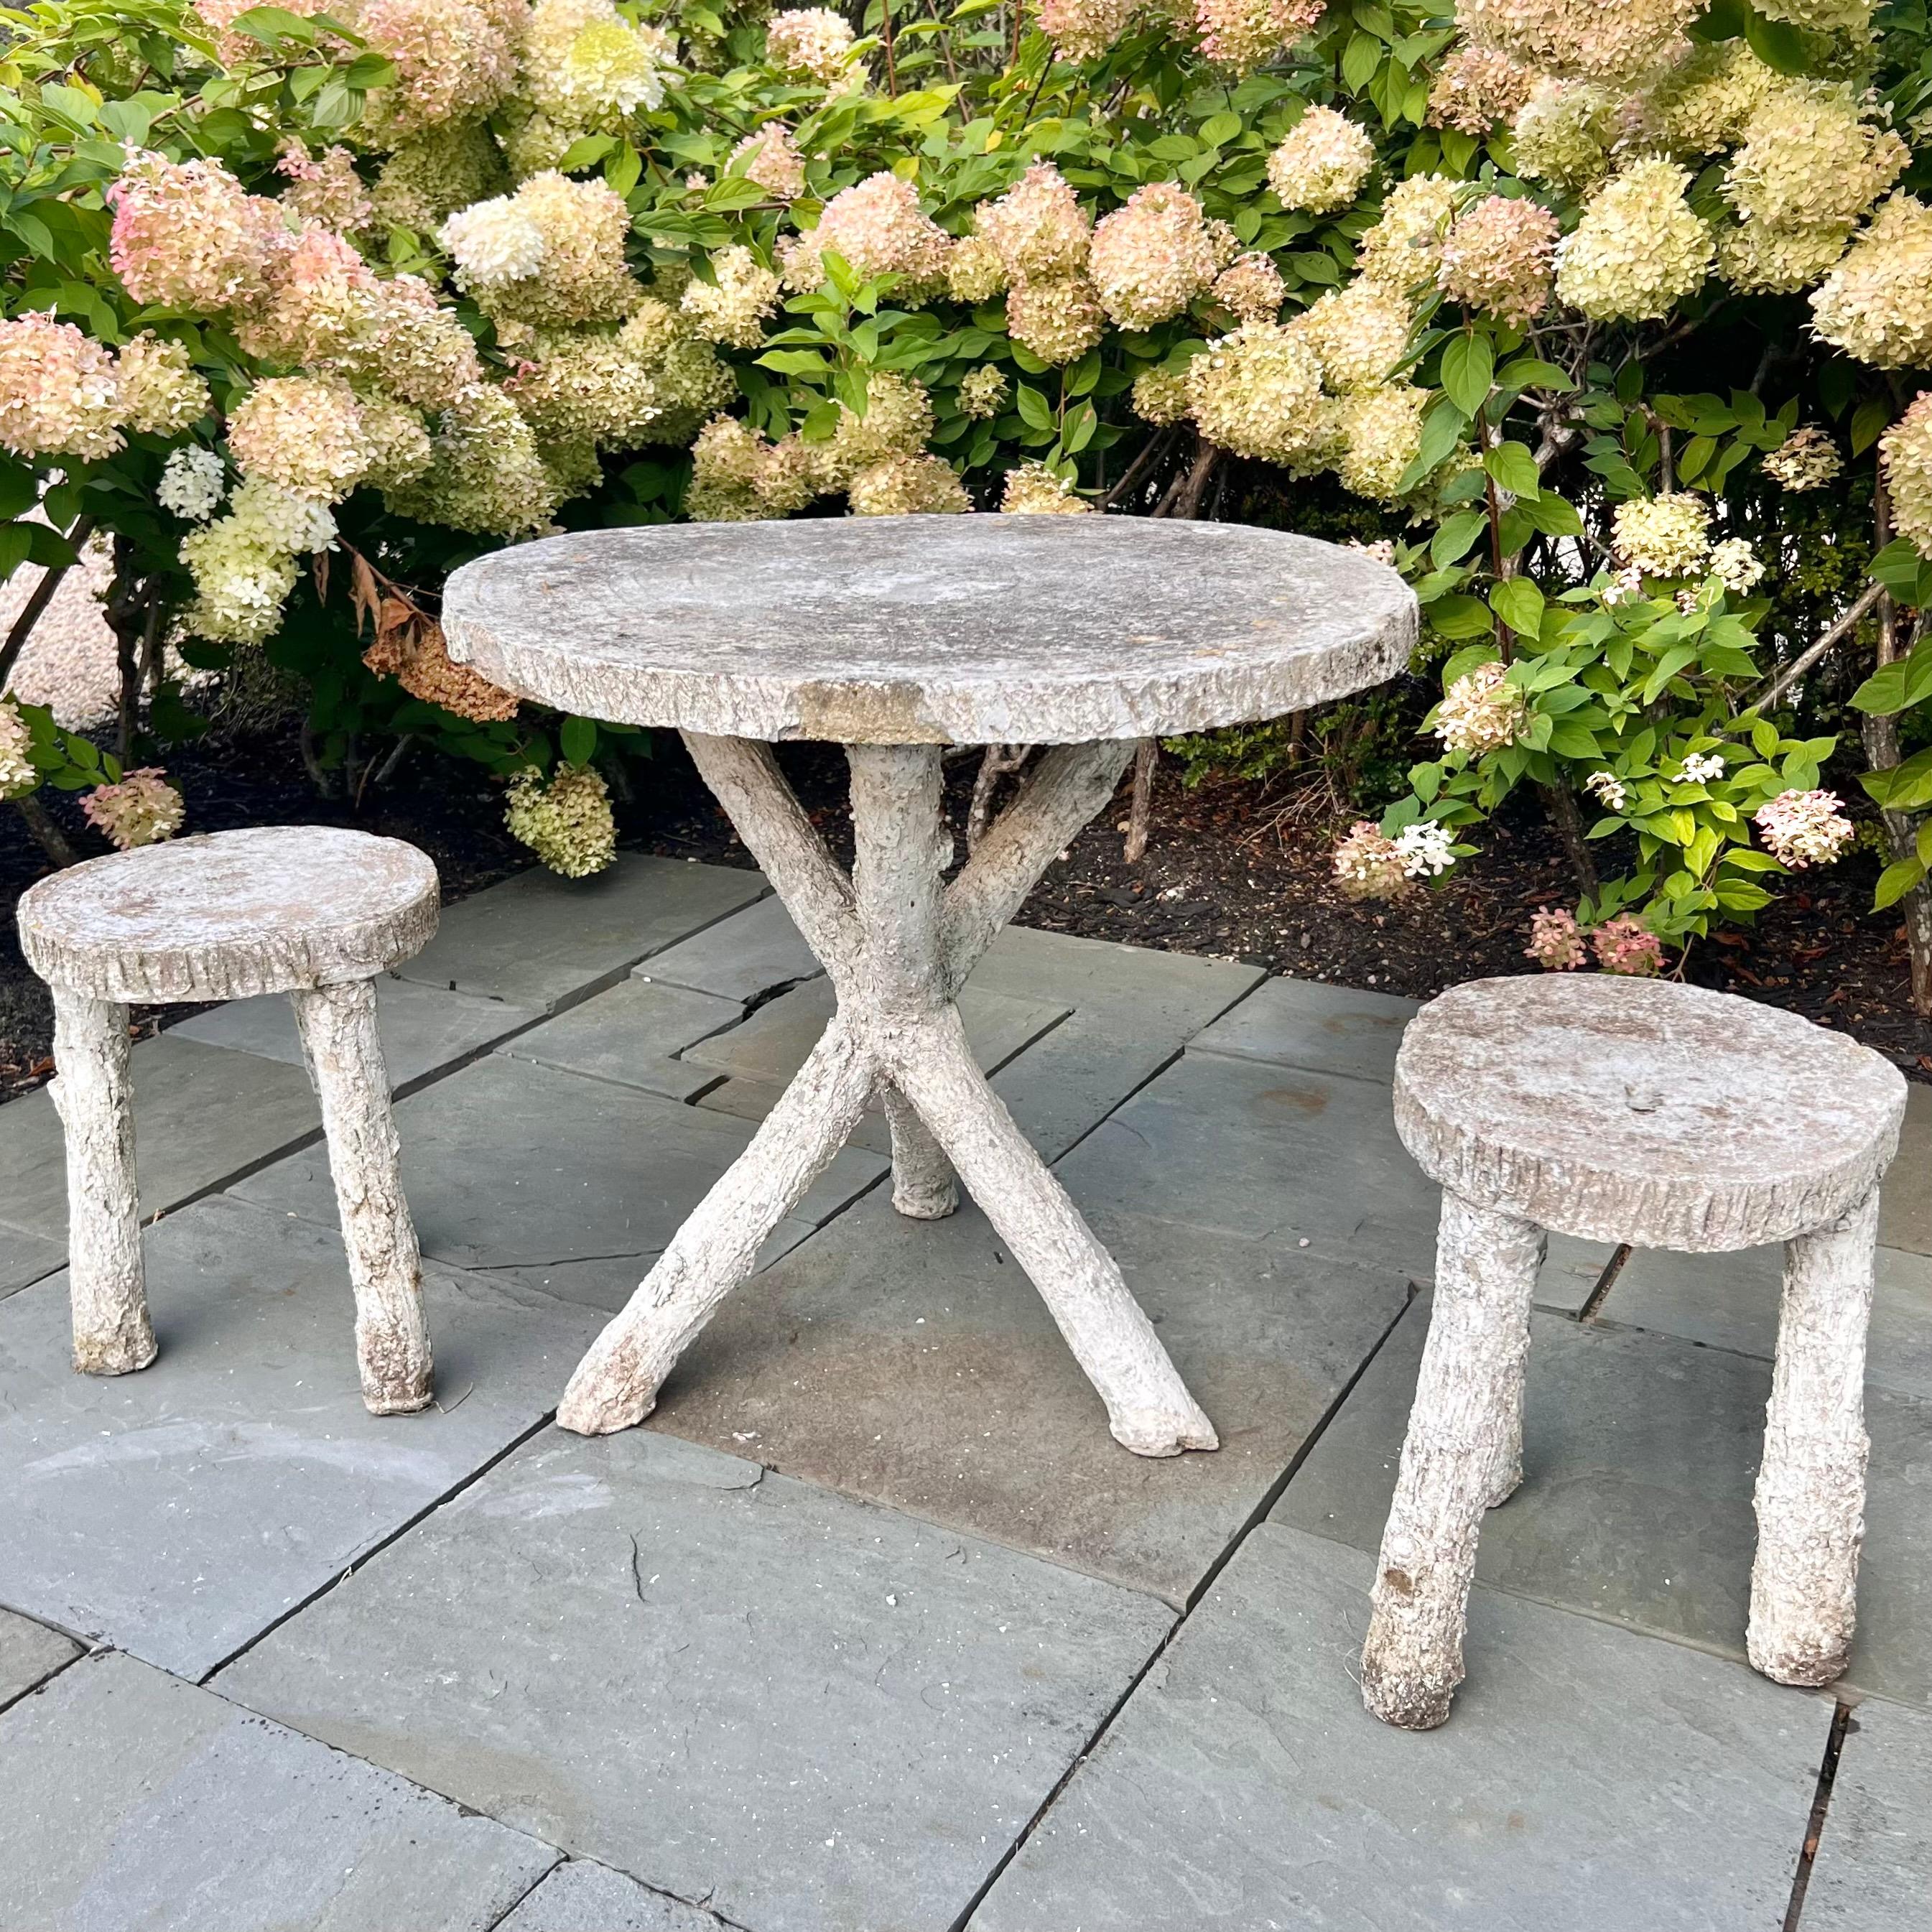 Mid-20th Century Faux Bois Concrete Table and Two Stools, 1960s France For Sale